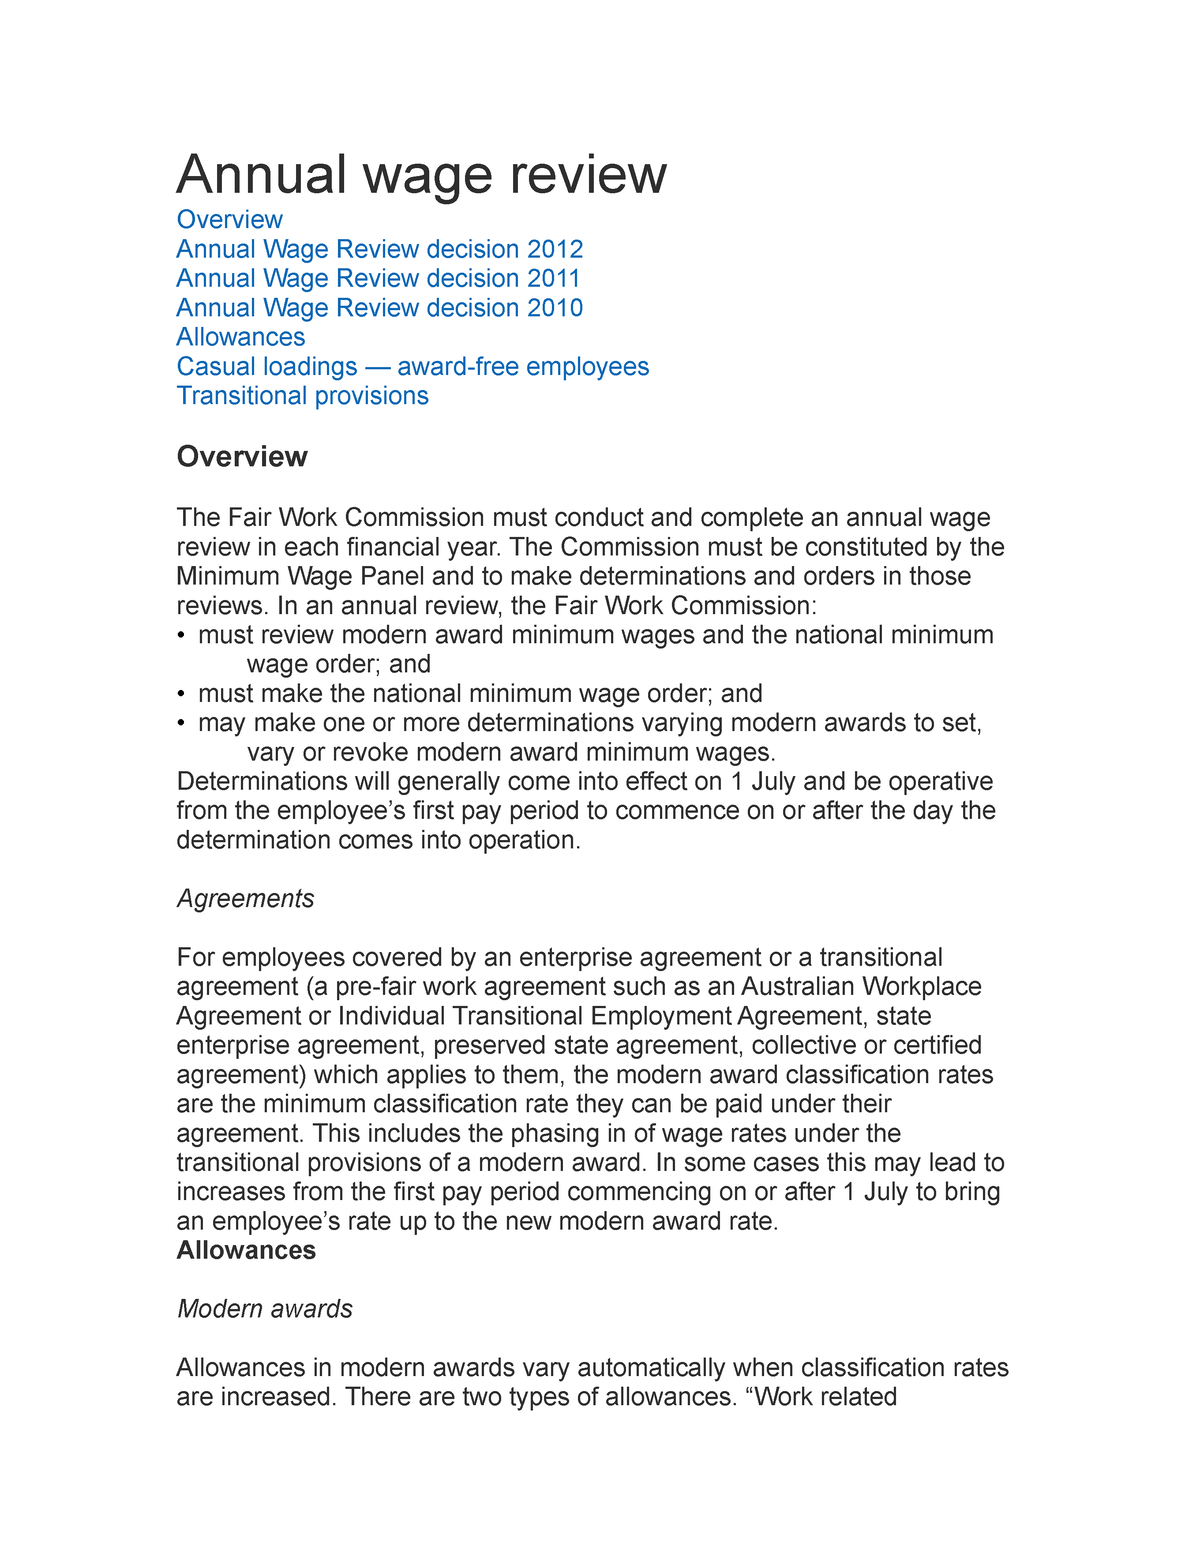 Annual wage review What can I do for more money Annual wage review